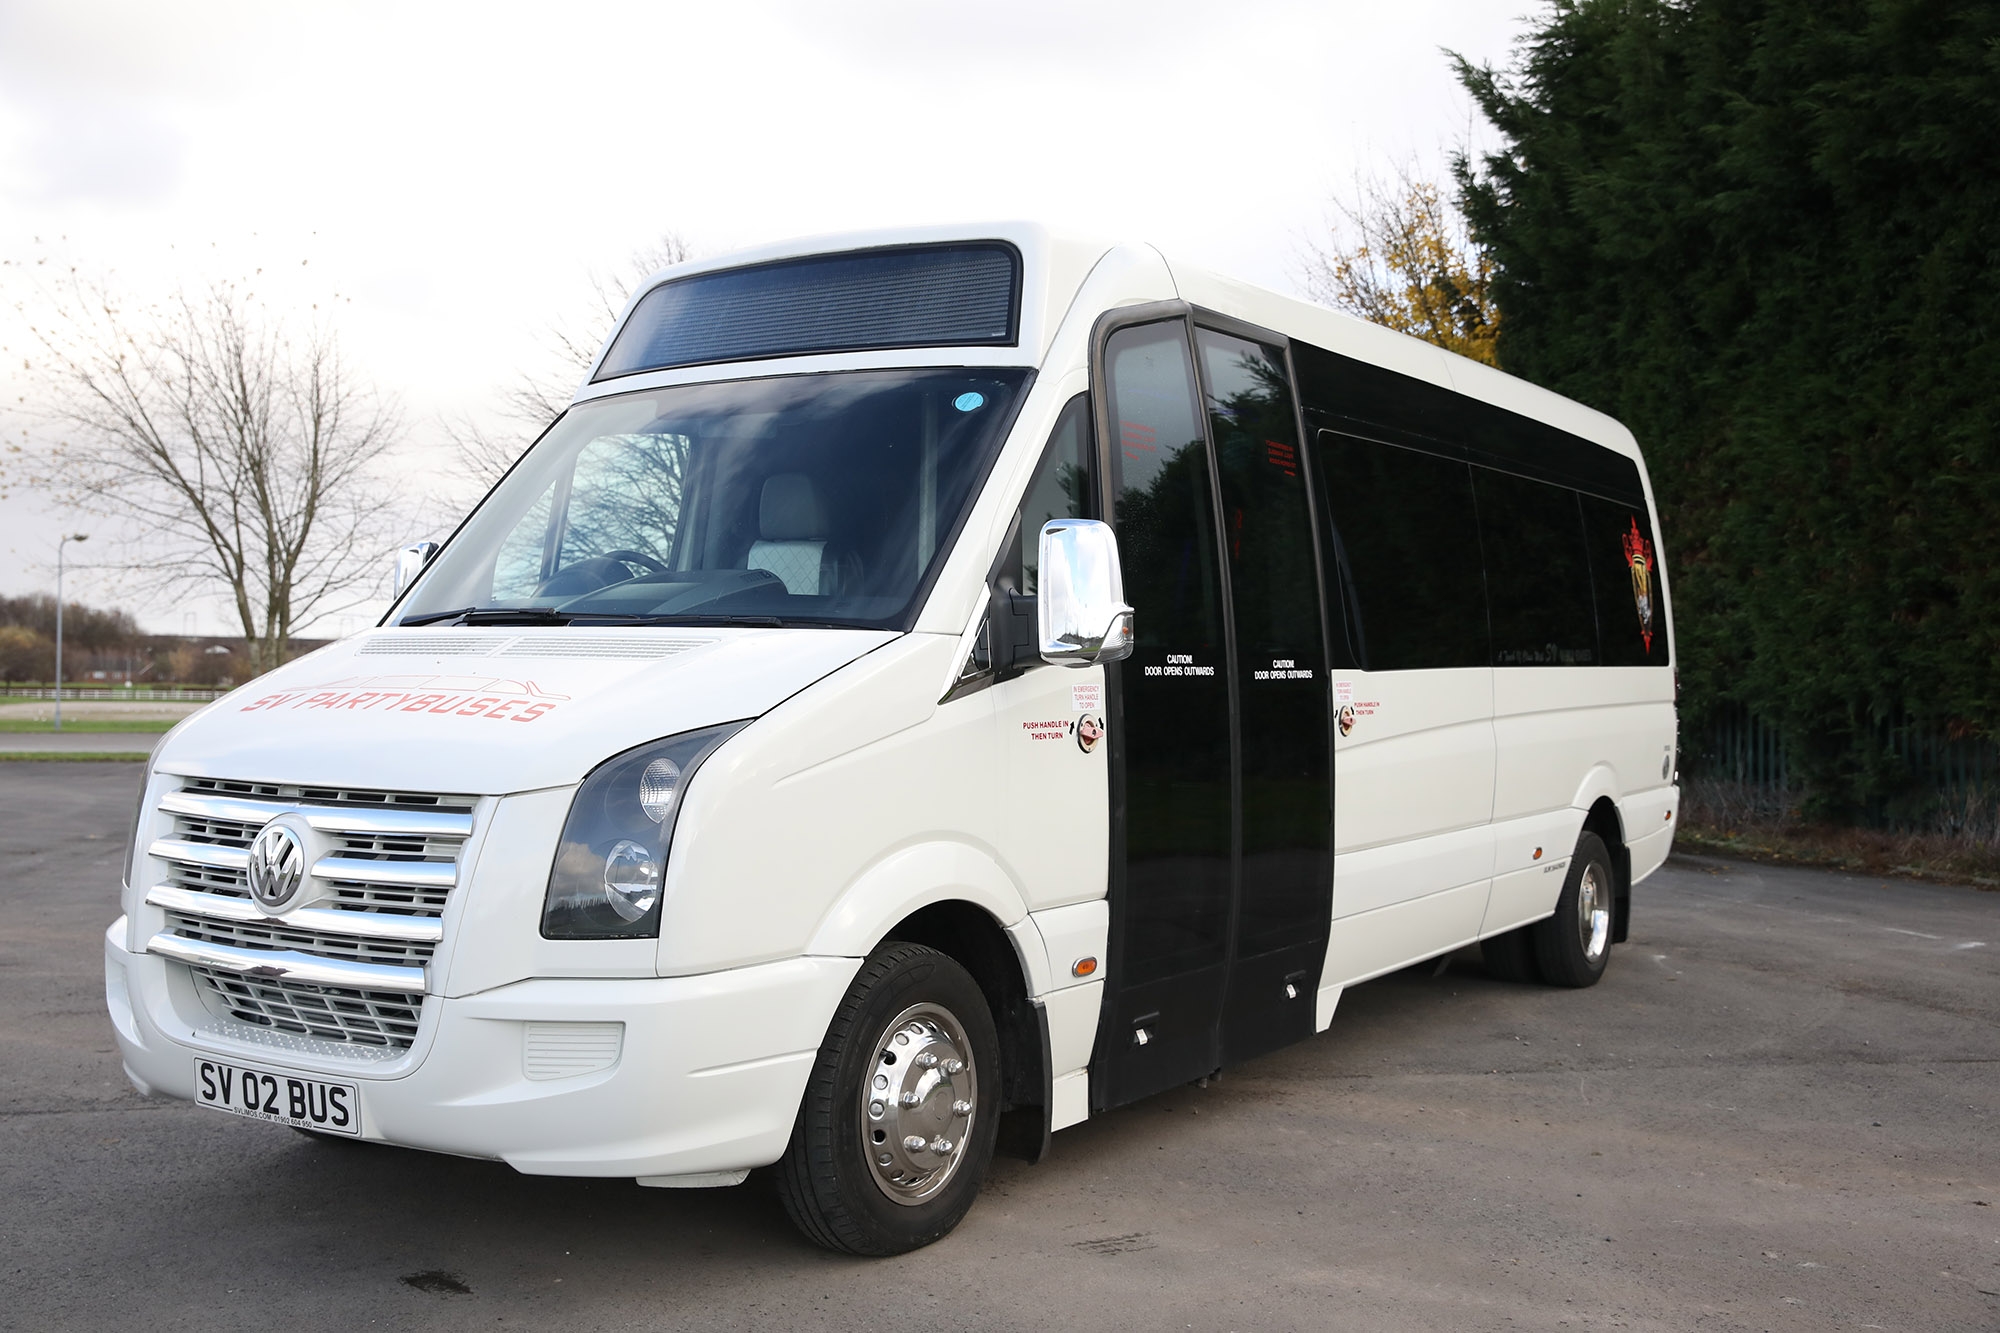 Party Bus Hire from Bridgend to Cardiff and/or Swansea: A Comprehensive Distance Review